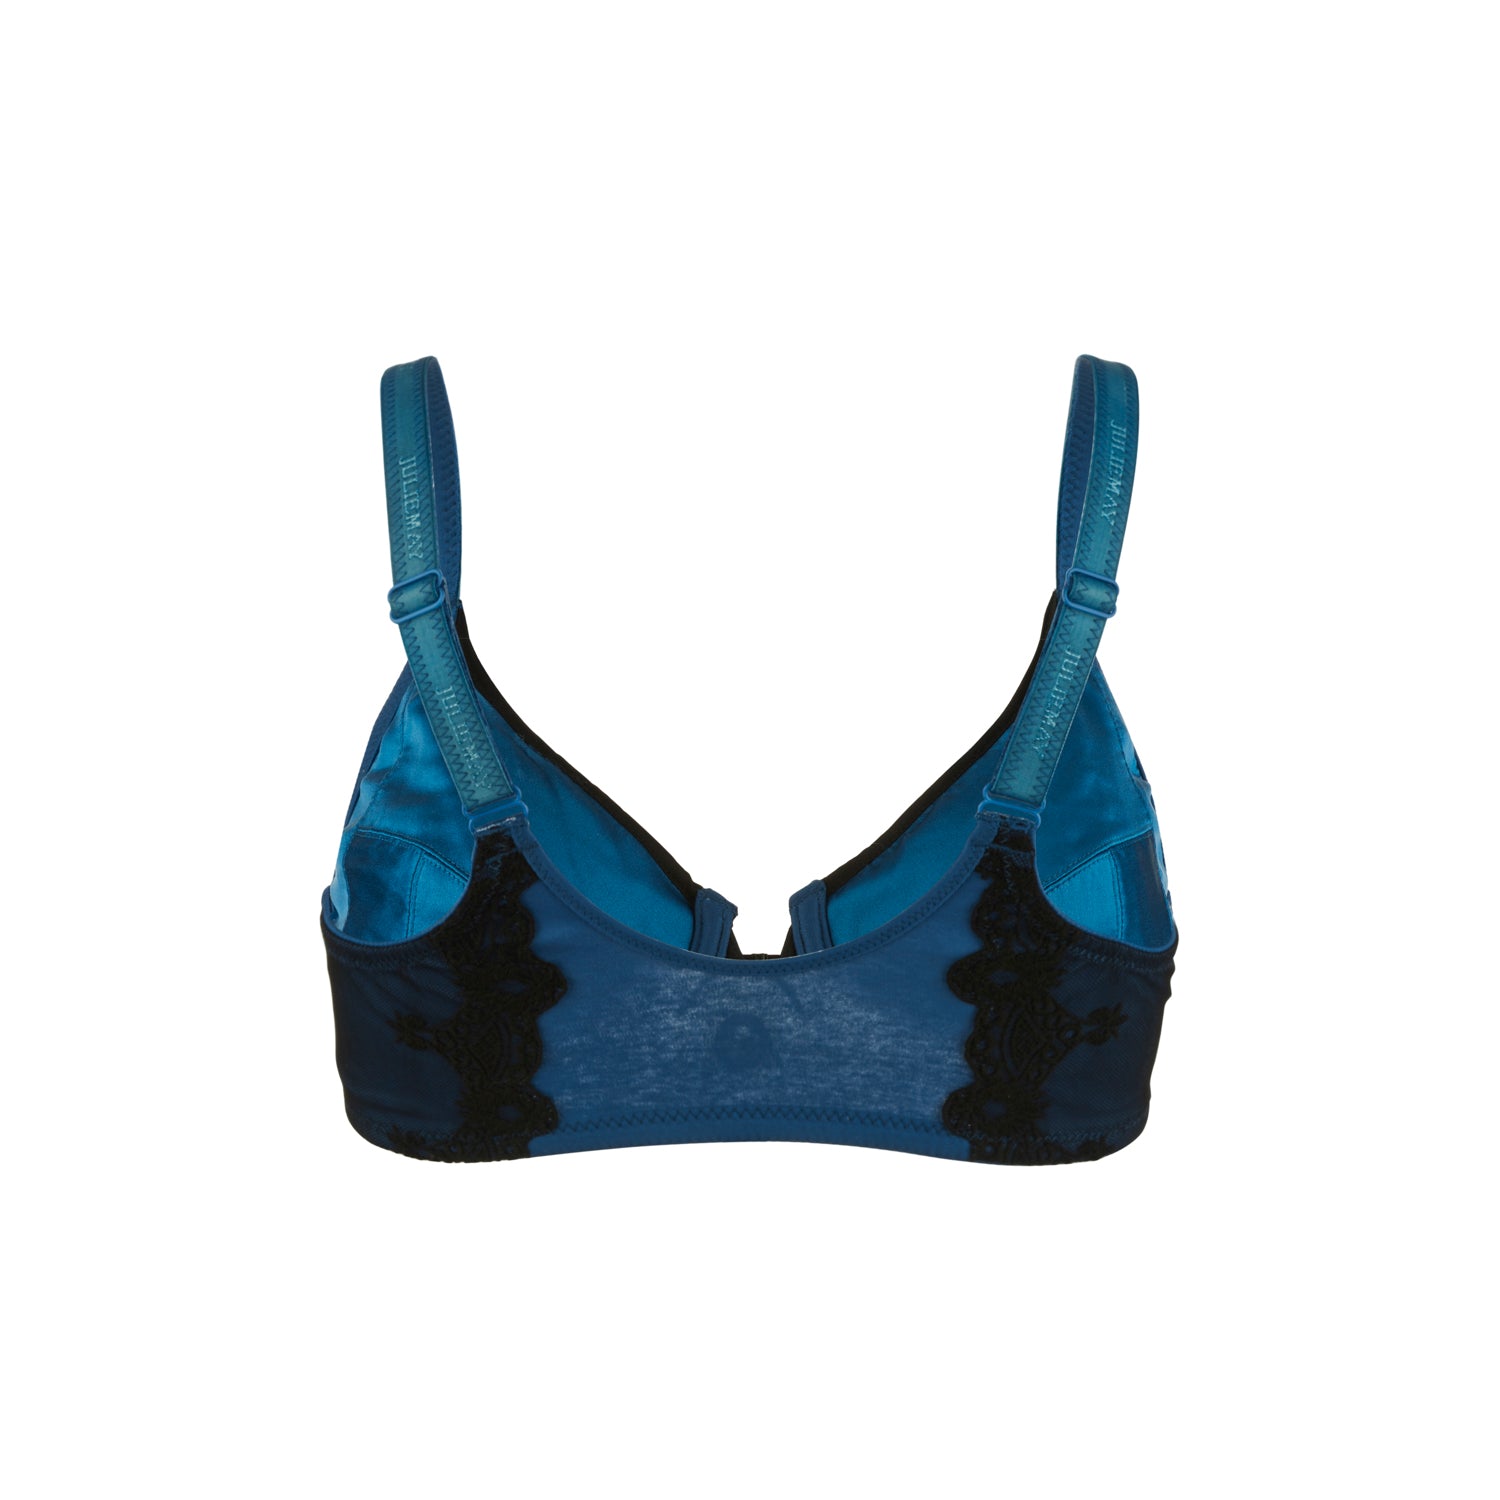 Elysia - Navy Blue Silk & Organic Cotton Front Closure Full Cup Underwired Bra